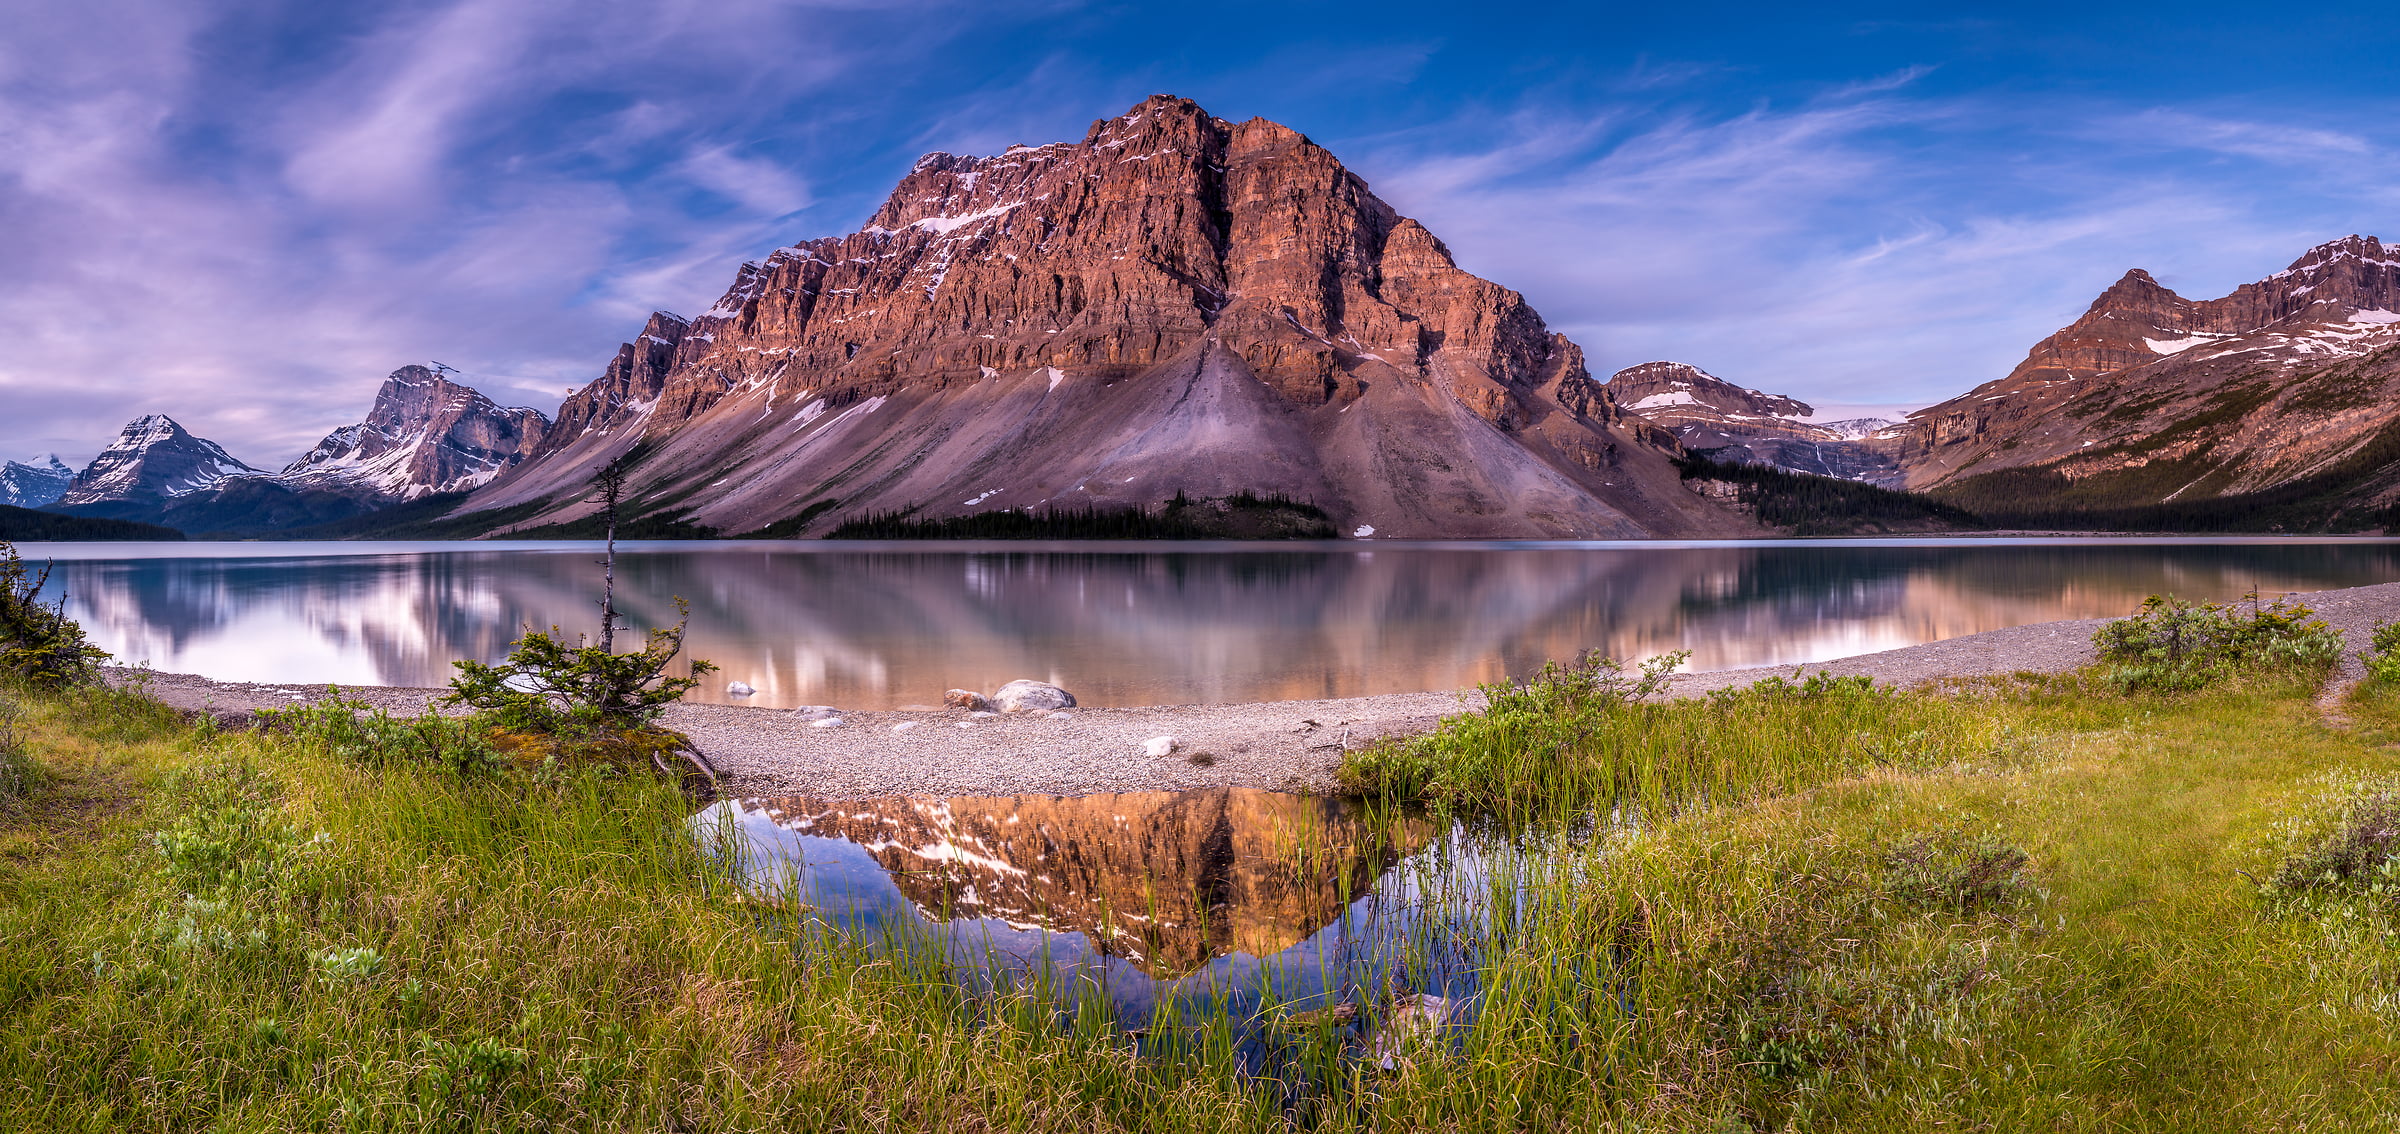 94 megapixels! A very high resolution, large-format VAST photo print of Bow Lake, Banff National Park, and the Rocky Mountains; fine art landscape photo created by Tim Shields in Alberta, Canada.